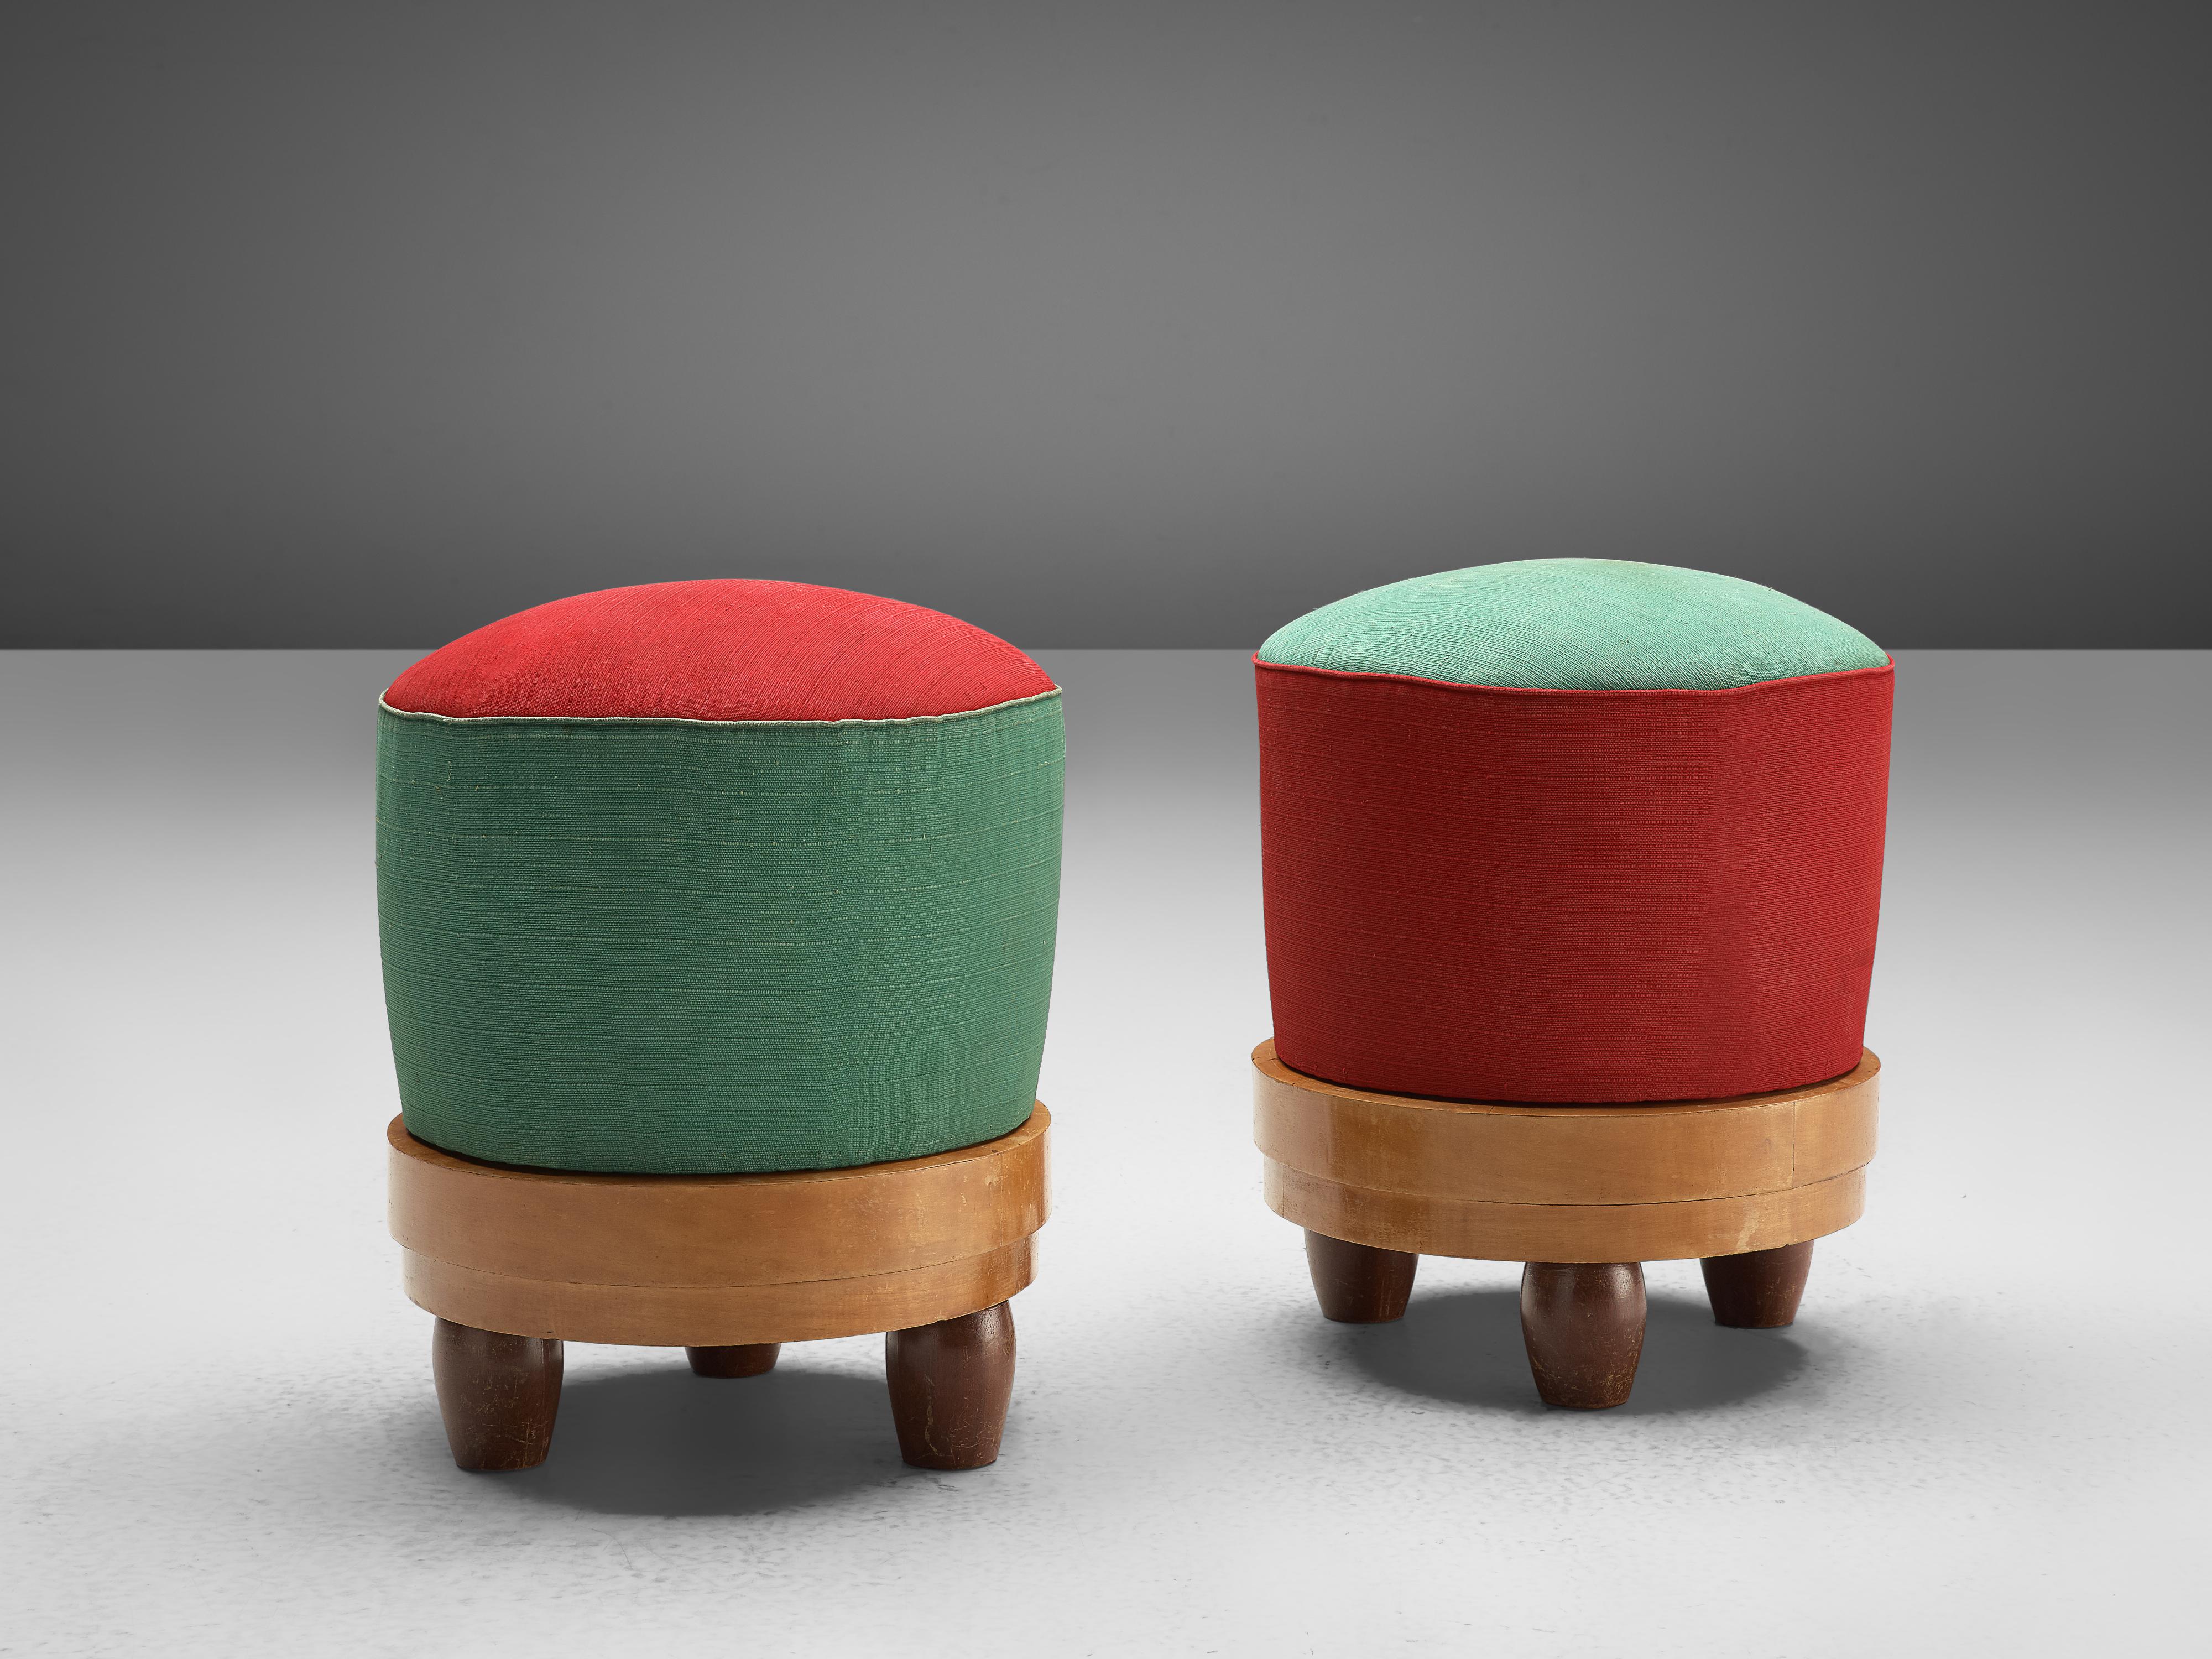 Poufs, fabric, wood, Europe, 1950s

Playful pair of round poufs. The current upholstery in red and green structured fabric contributes to the playful expression. Three legs and a wooden frame lift the pouf up and add a subtle Art Deco touch to the